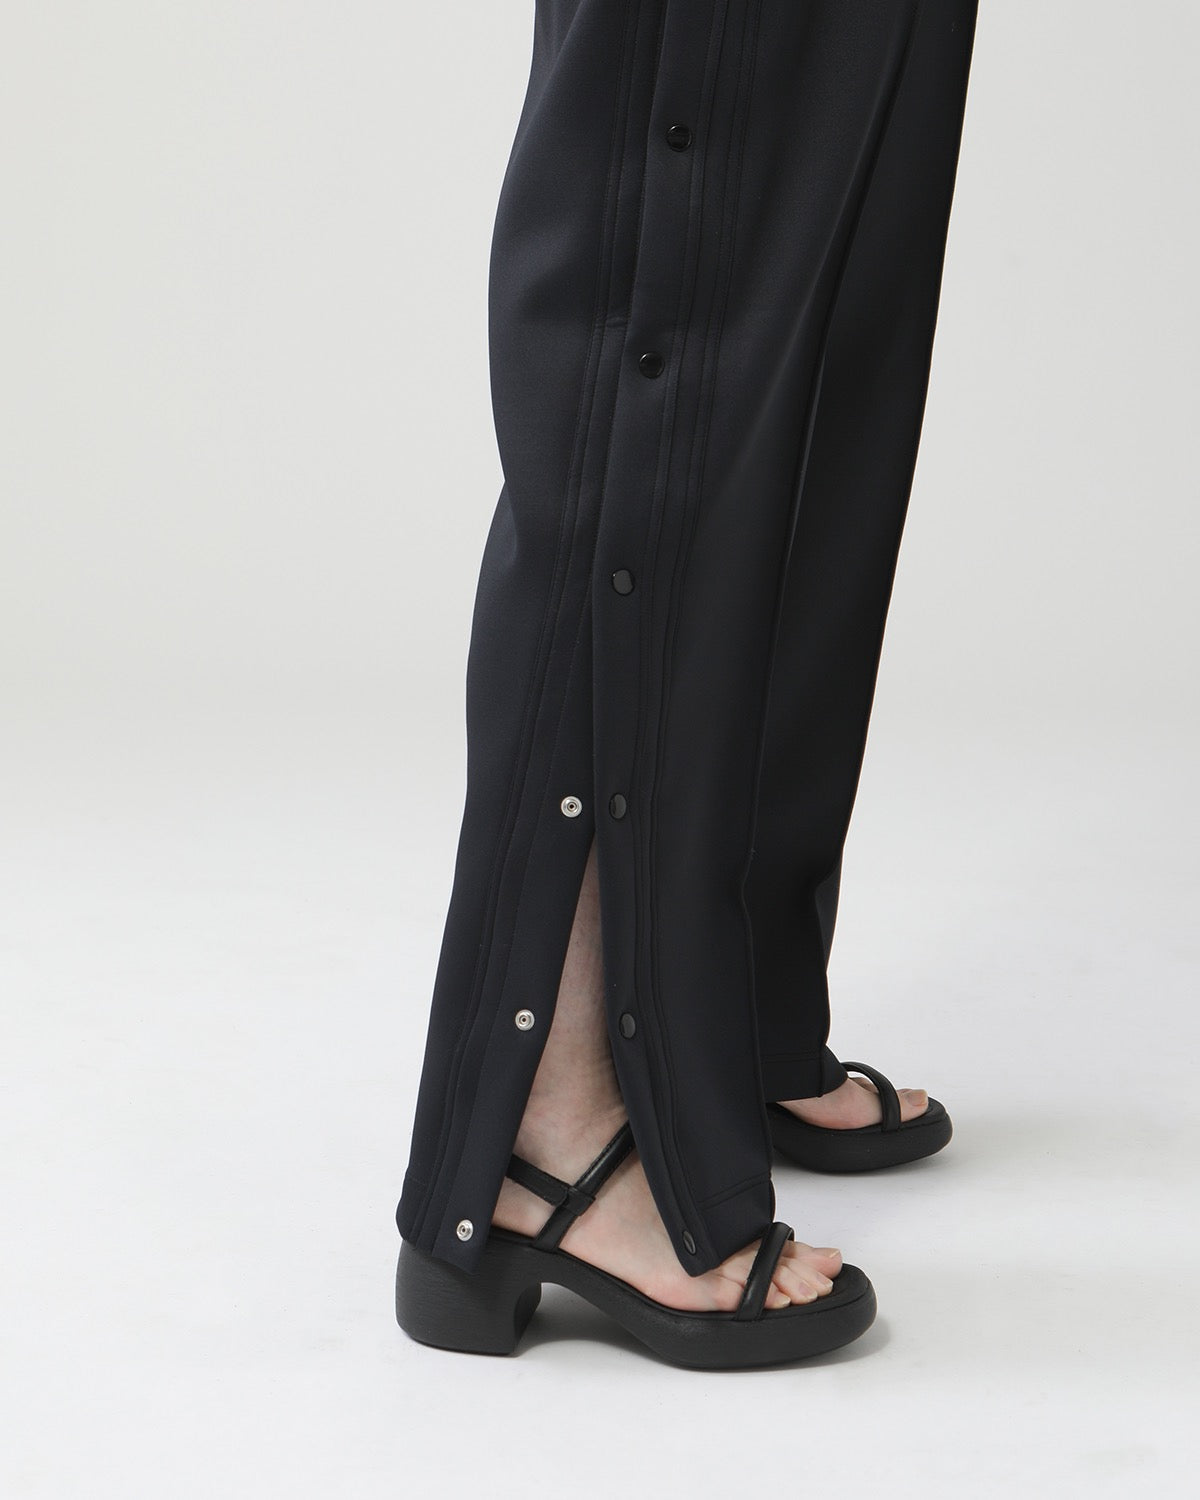 POLYESTER JERSEY SIDE OPEN PANTS